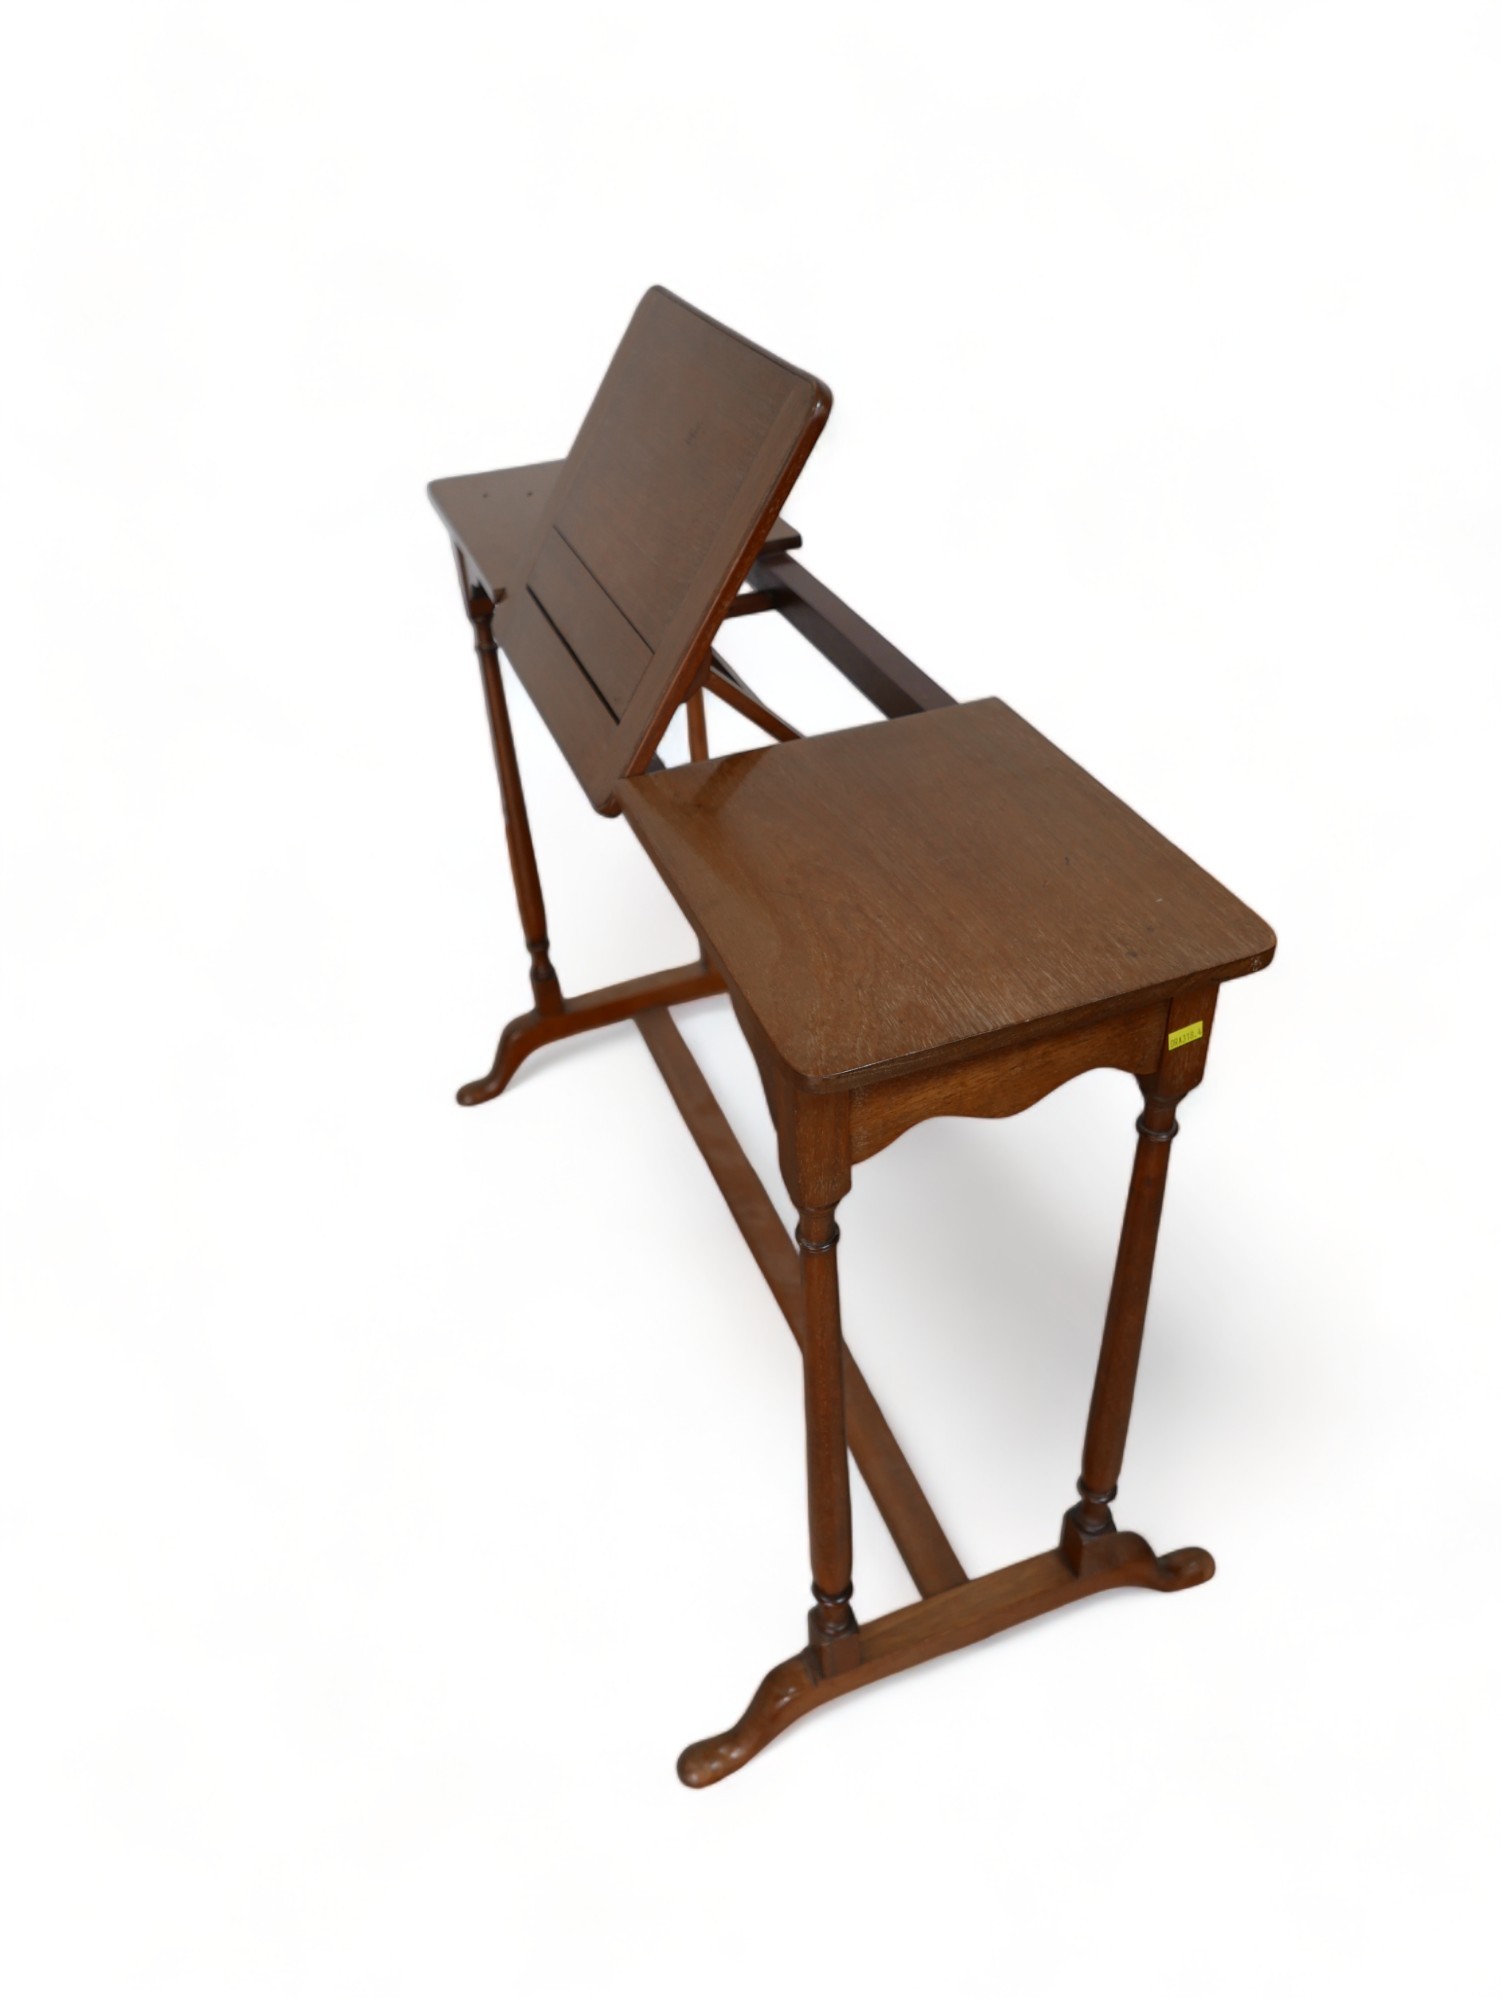 An early 1900s mahogany library reading table with a folding bookrest 93.5 by 46.5 by 68.5cm tall. - Image 6 of 11